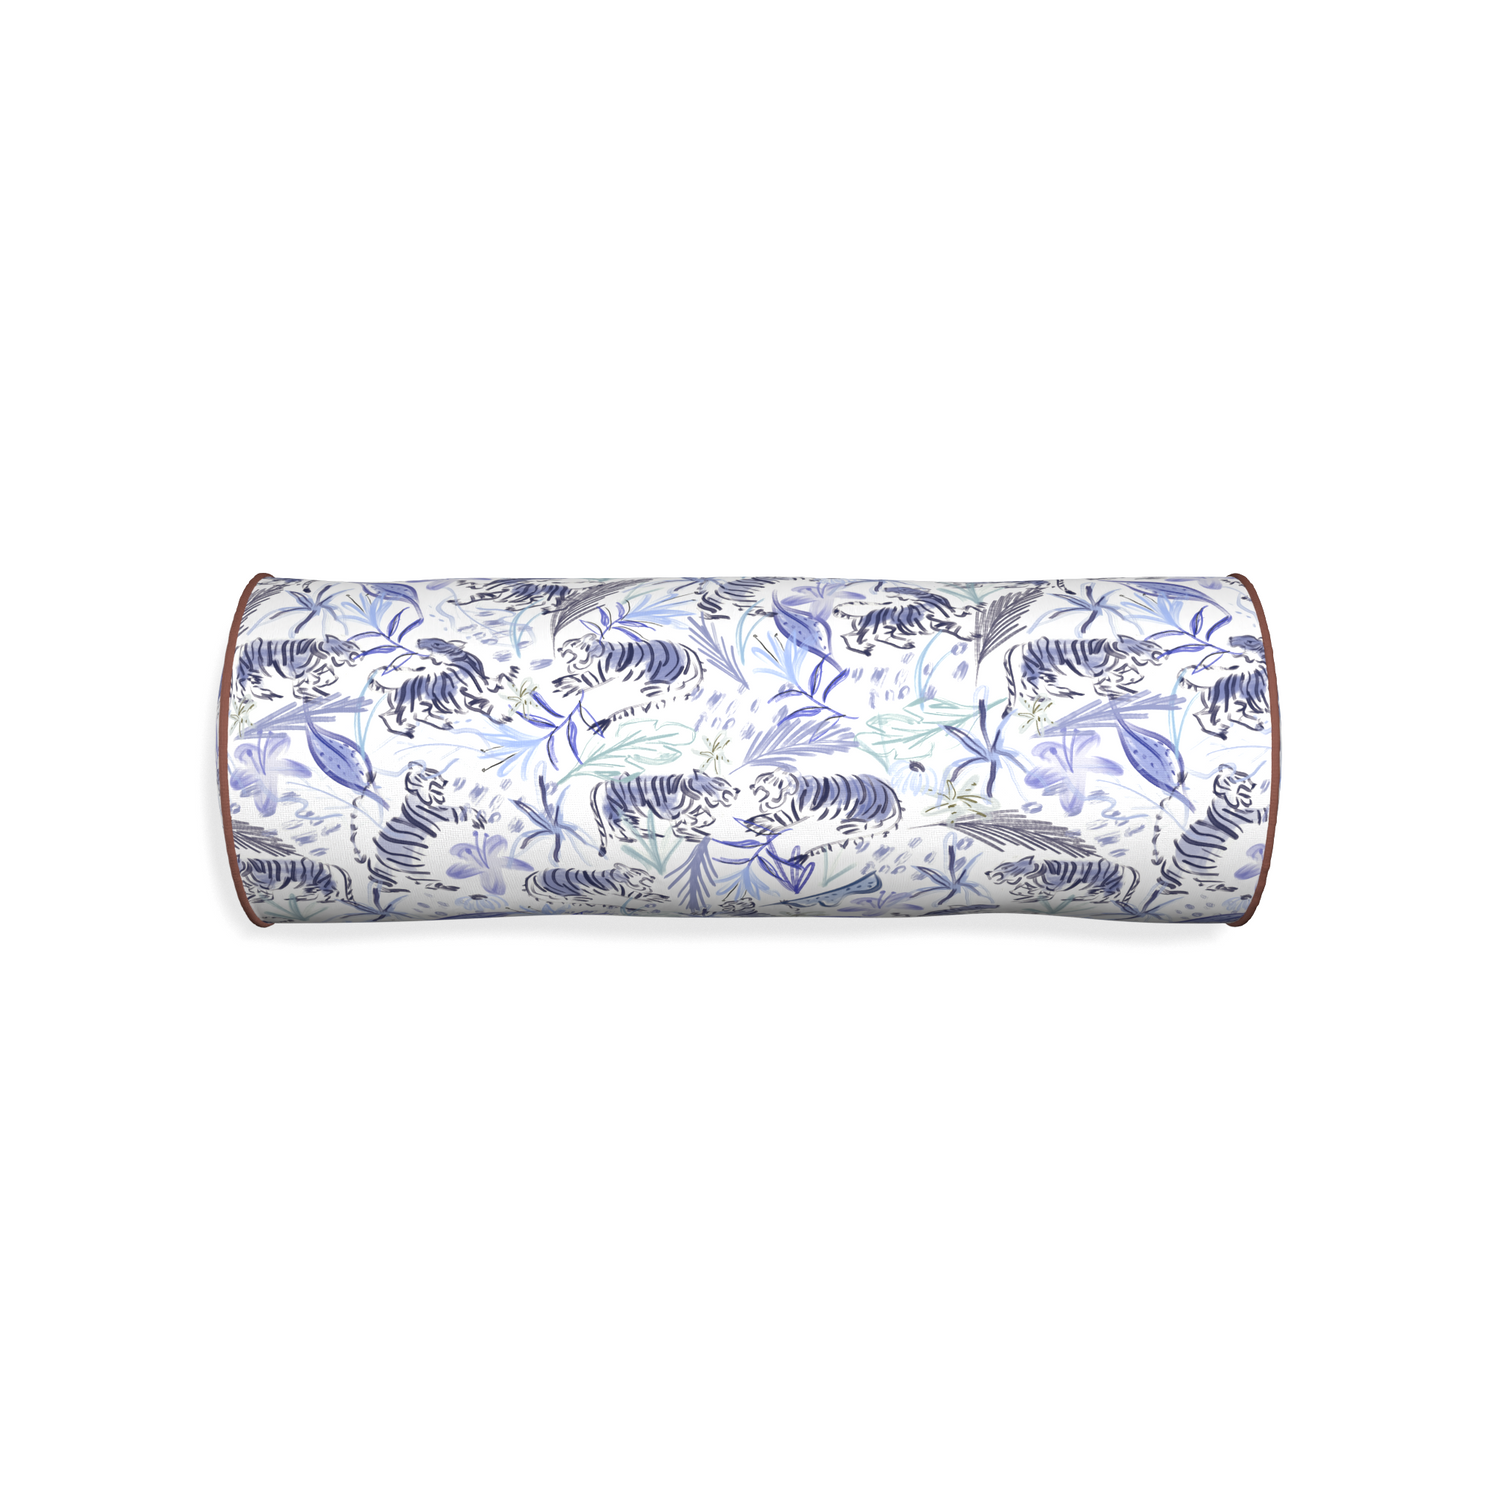 Bolster frida blue custom blue with intricate tiger designpillow with w piping on white background